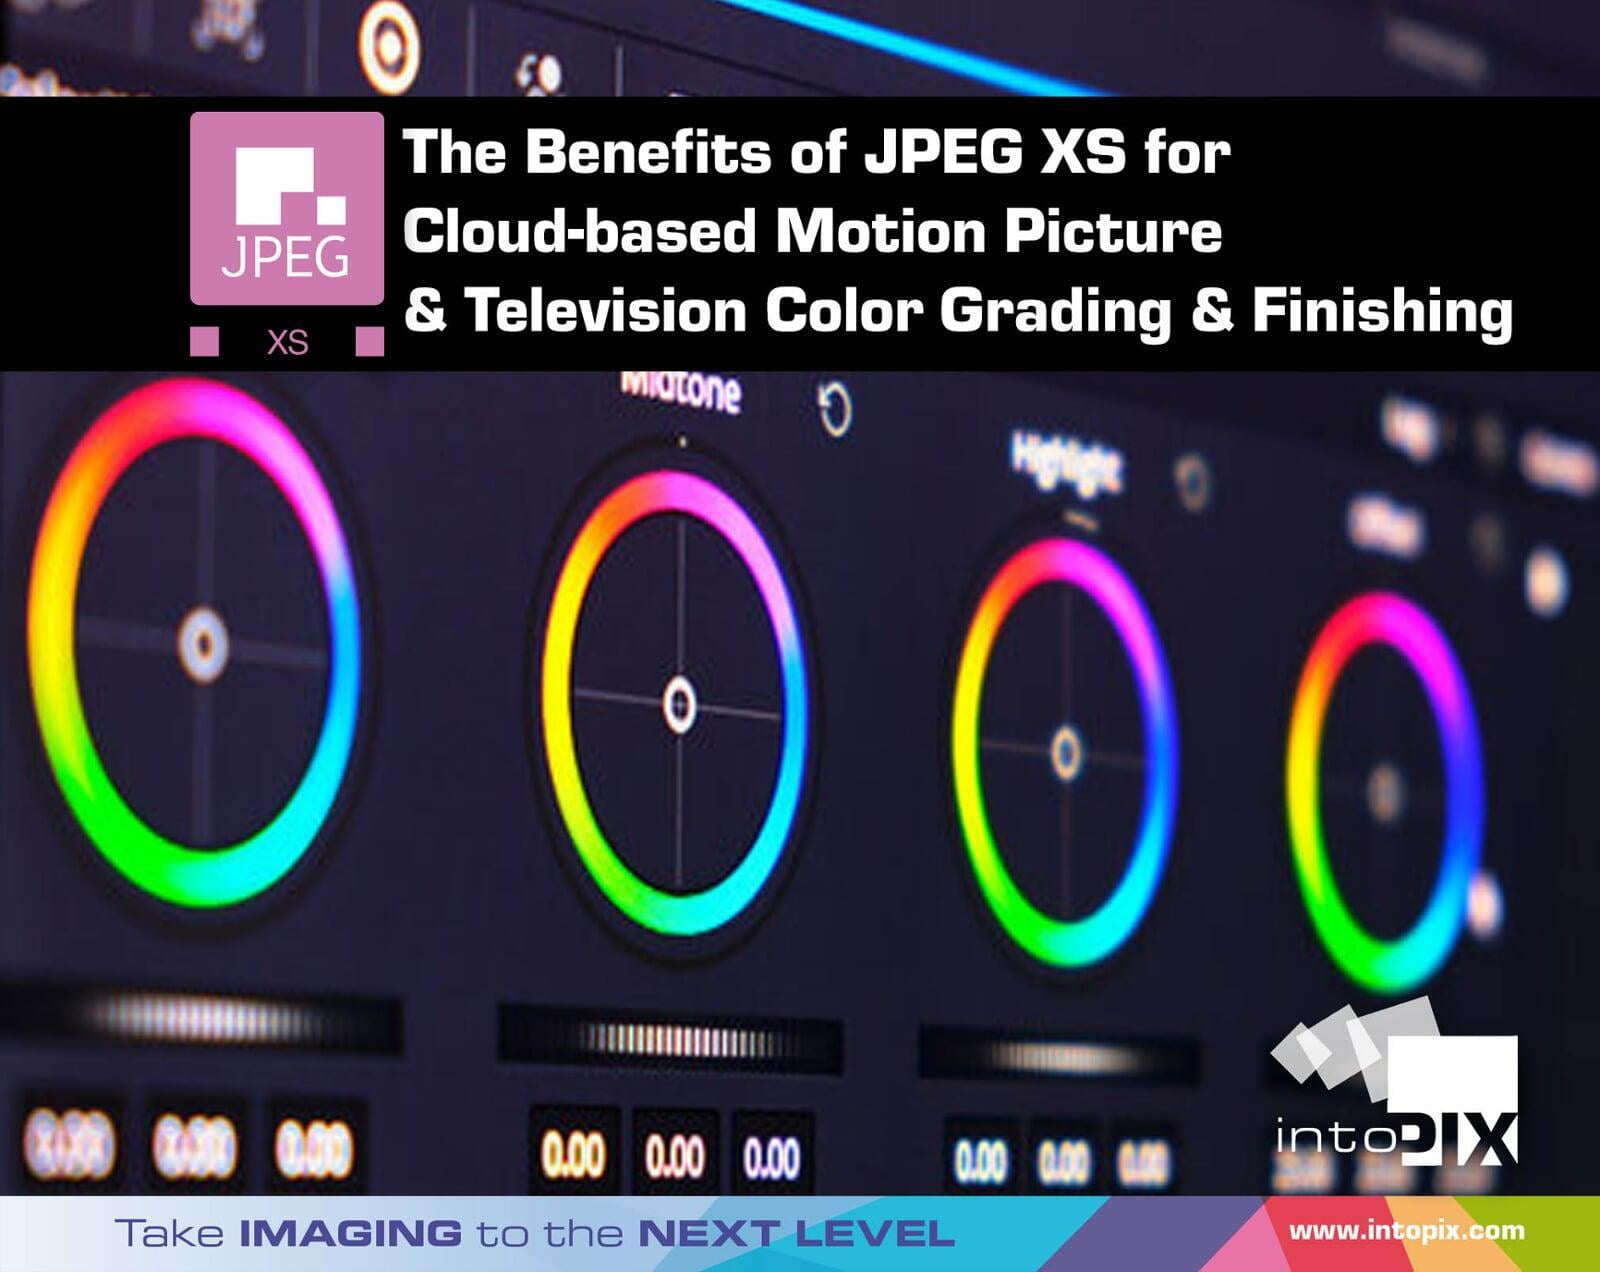 Leveraging the Benefits of JPEG XS for Cloud-based Motion Picture and Television Color Grading and Finishing